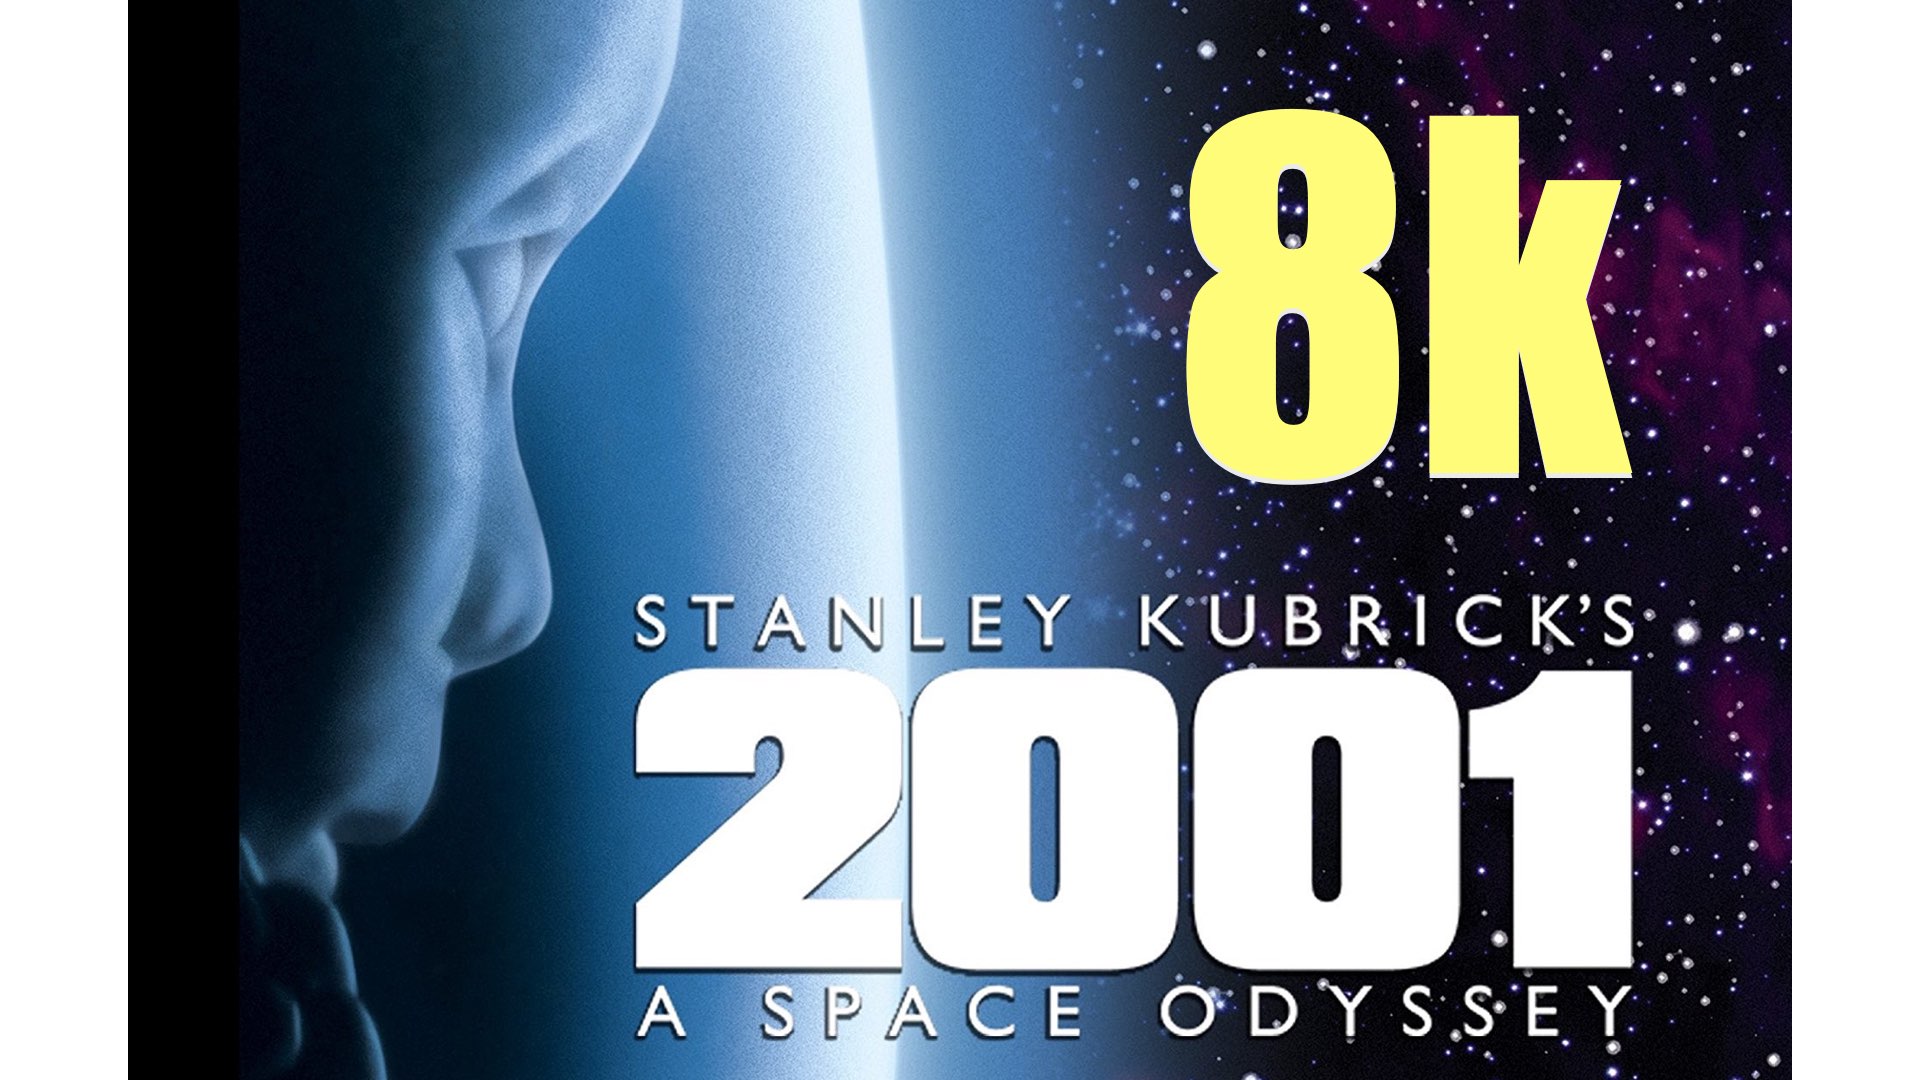 2001: A Space Odyssey in 8K broadcast